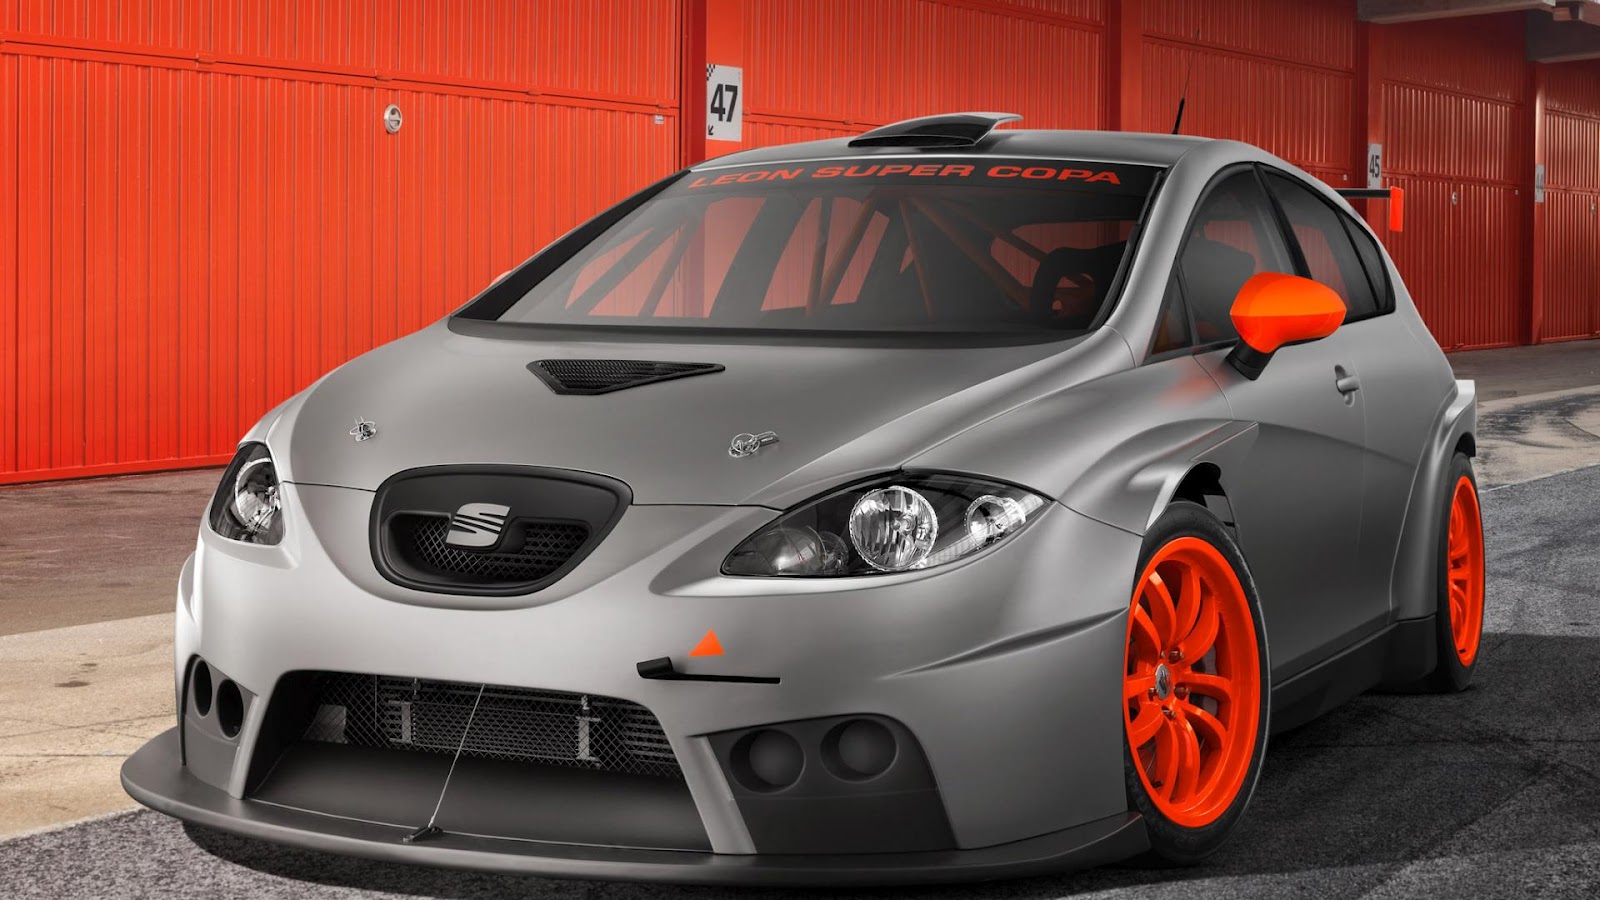 Seat Leon Hd Wallpapers - Seat Leon 2010 Tuning , HD Wallpaper & Backgrounds